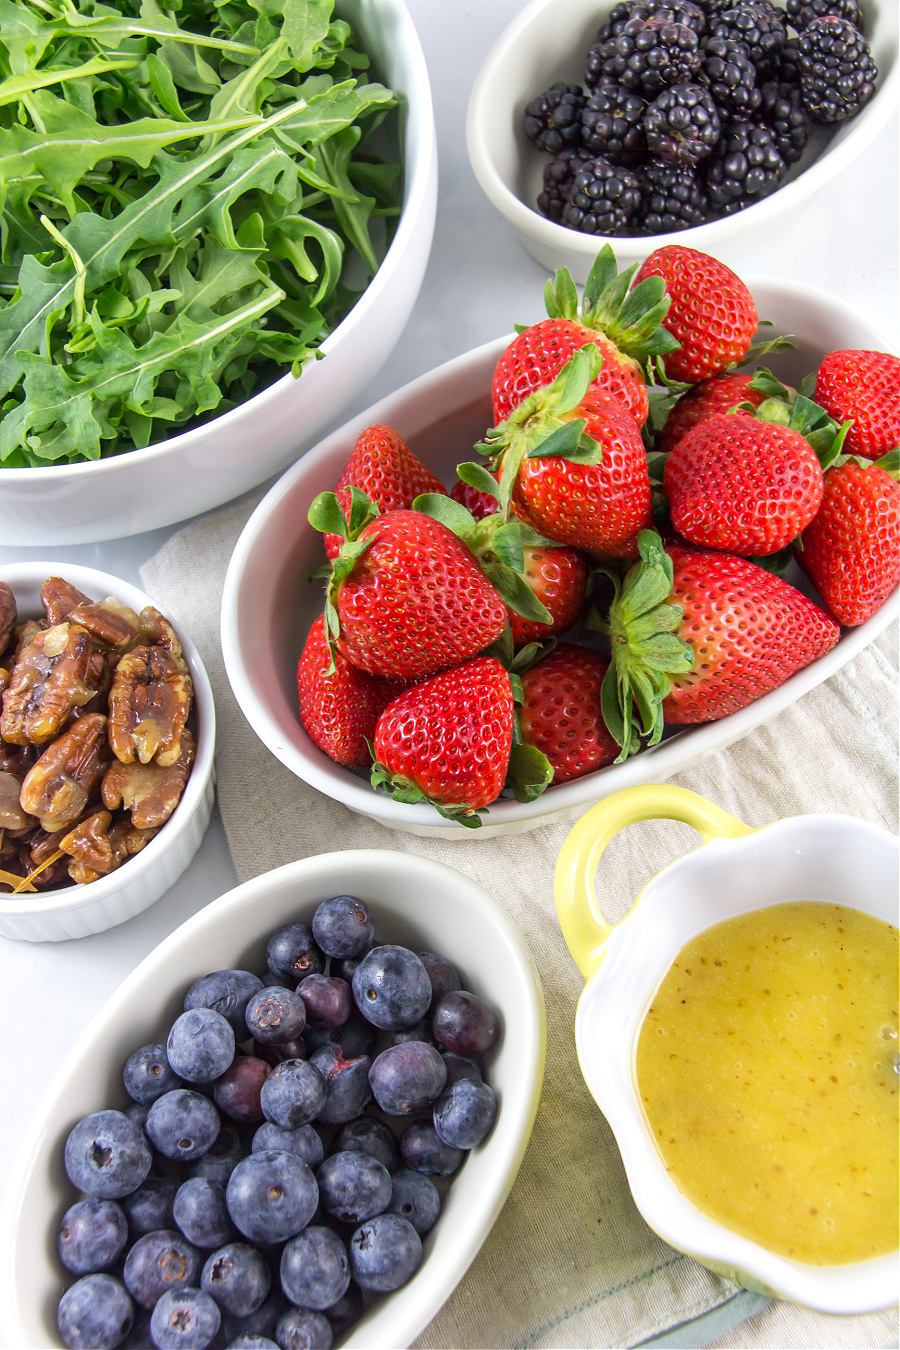 ingredients to make a berry salad for spring